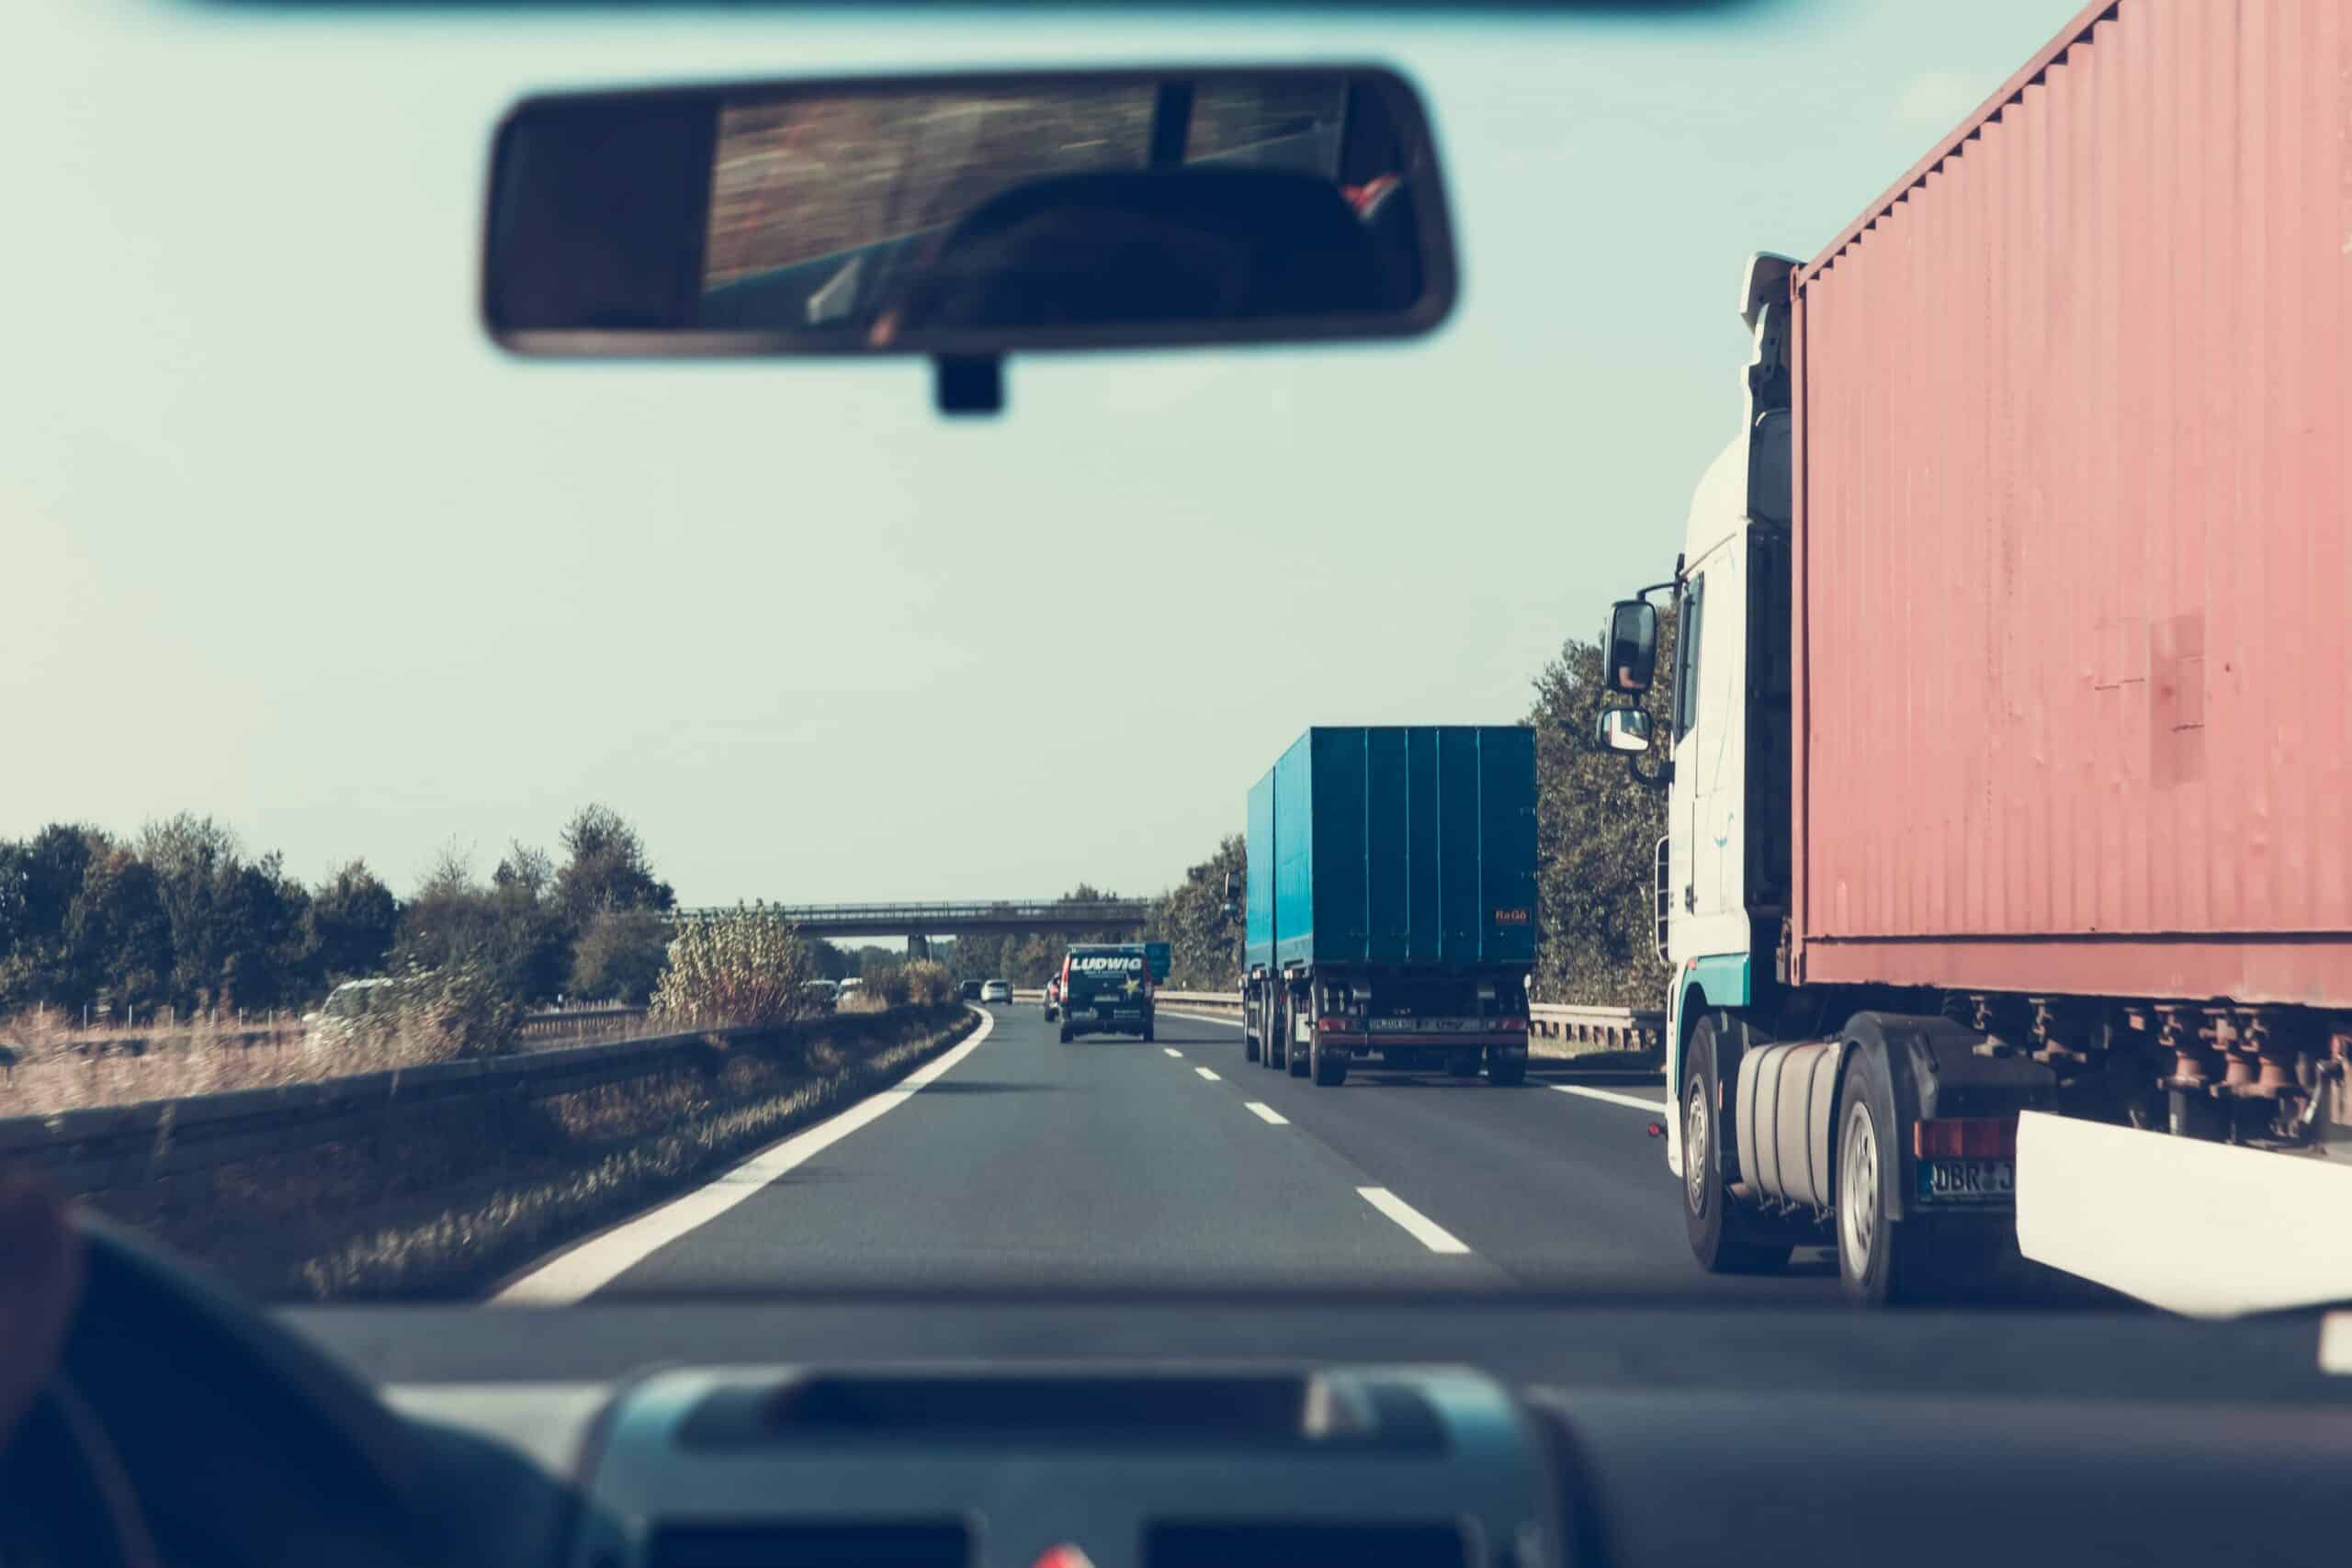 Truck accidents due to driver fatigue or distraction